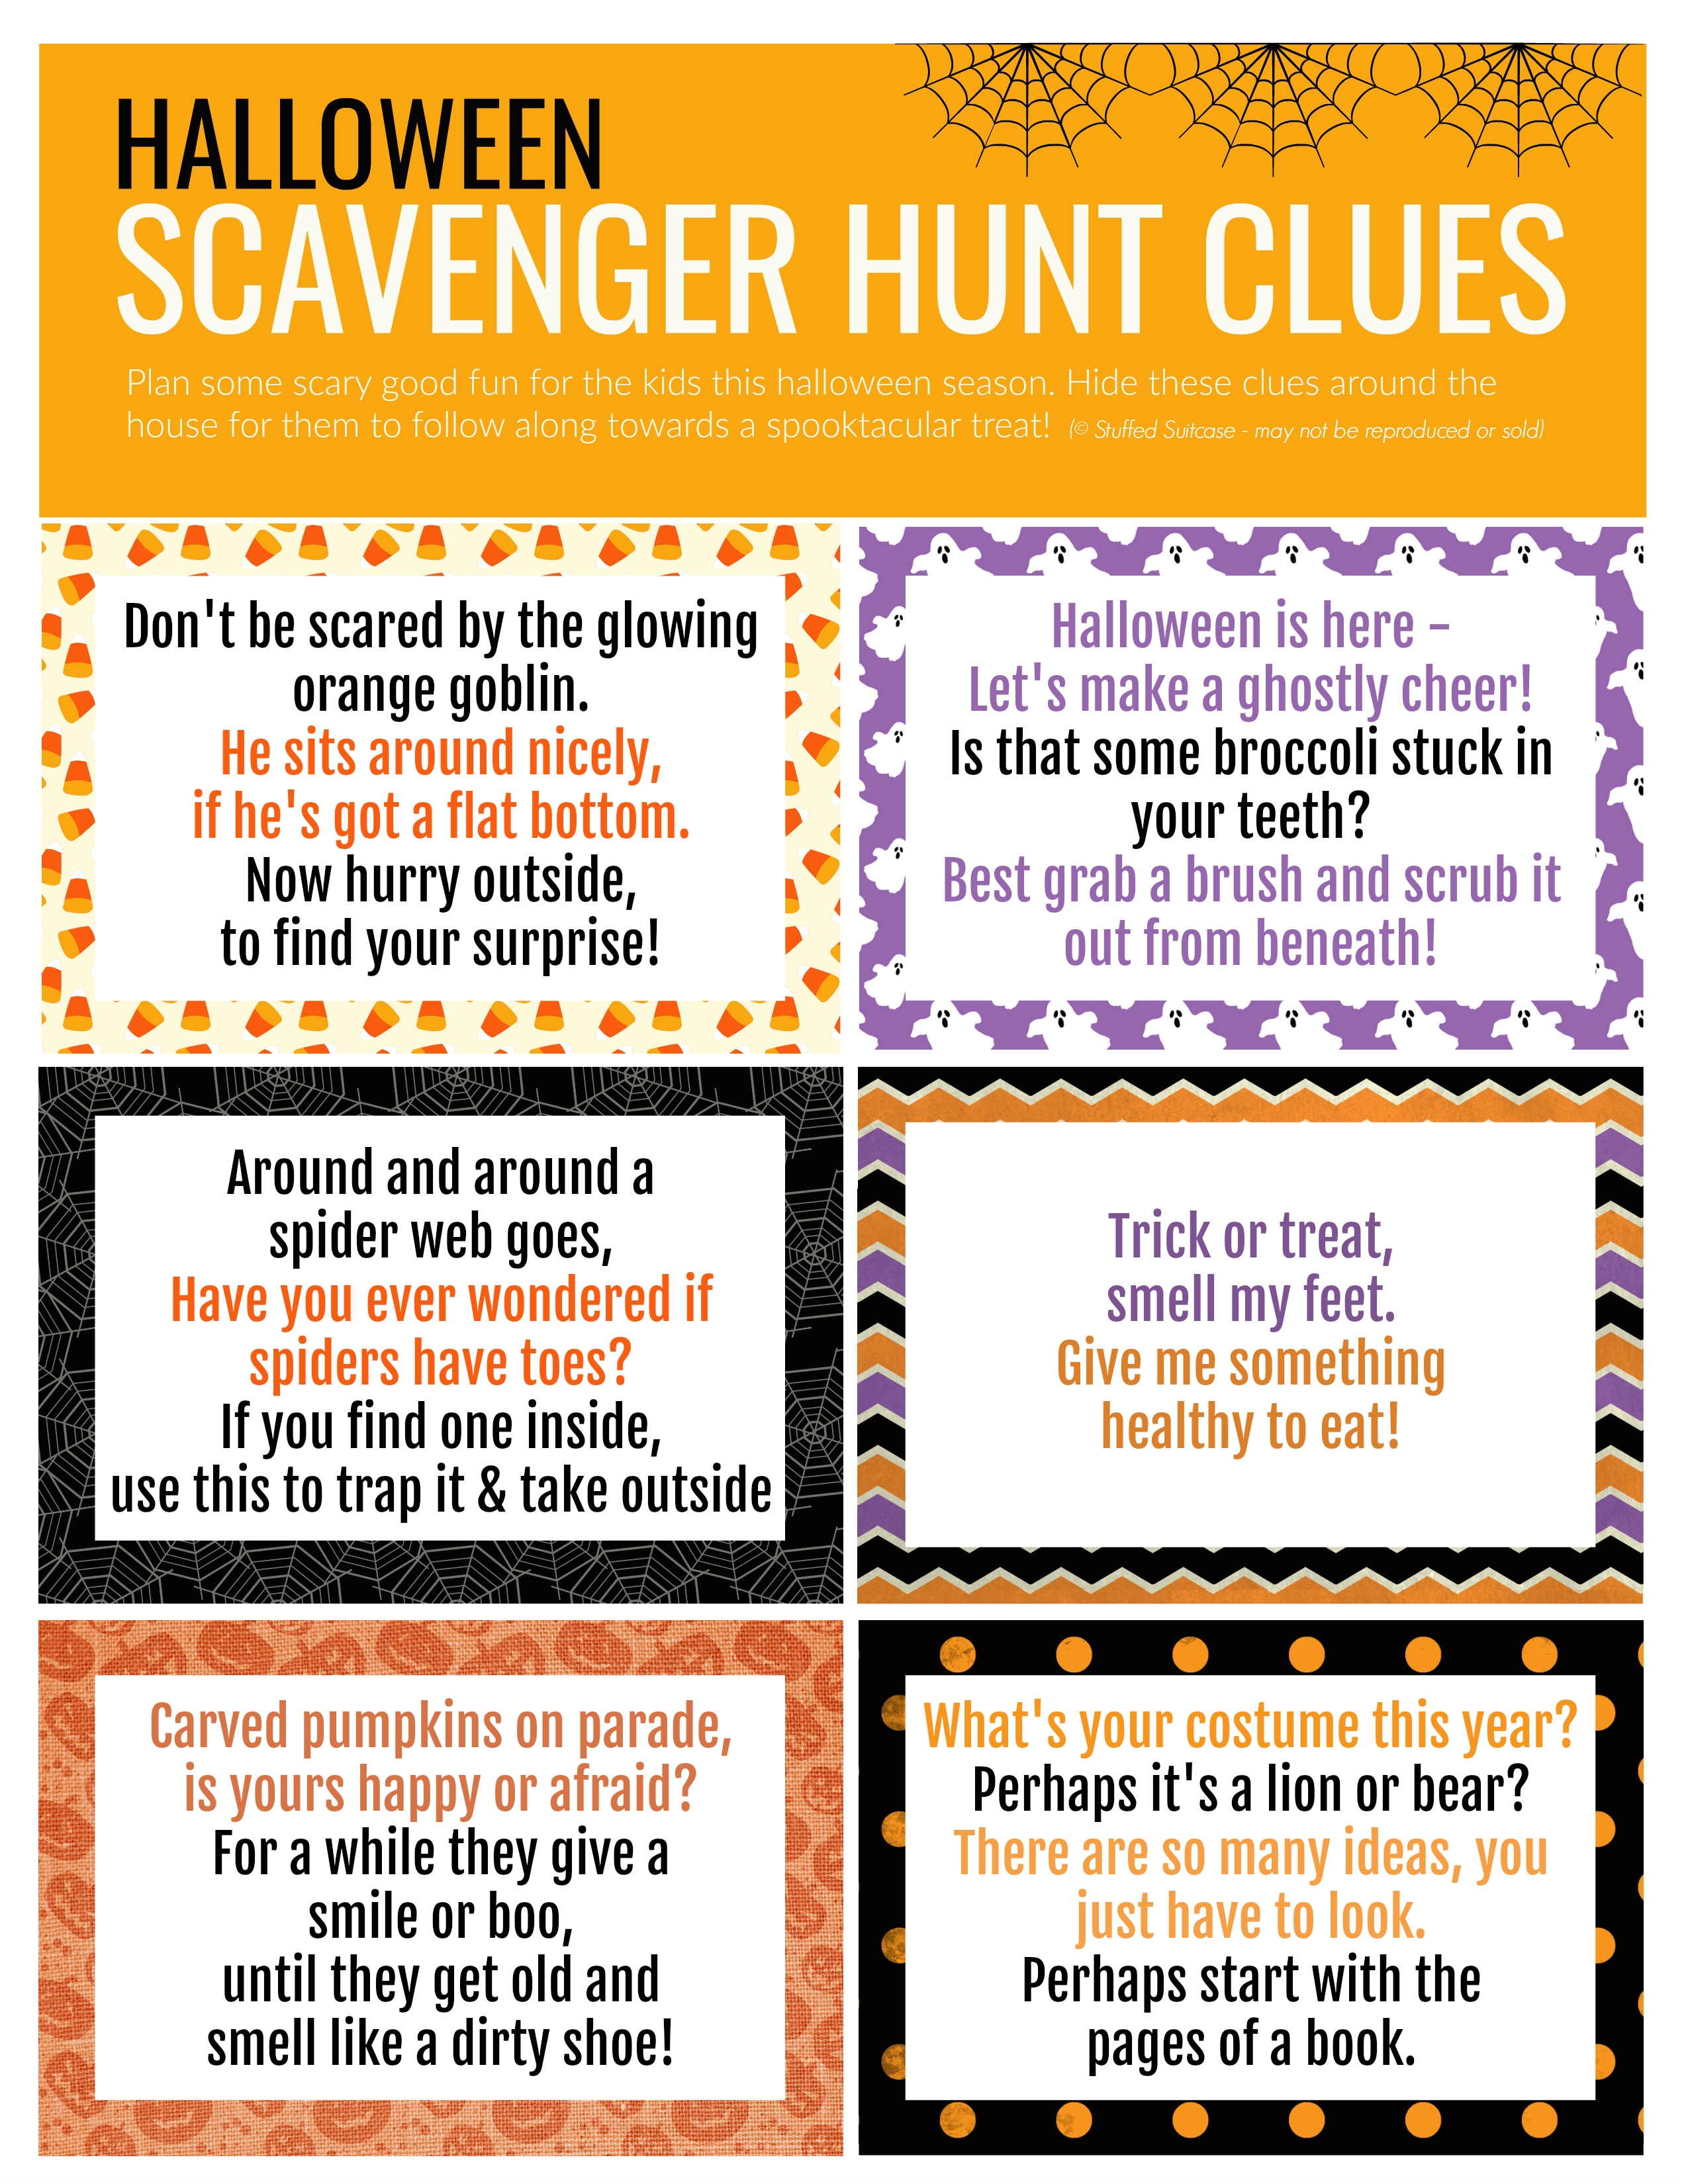 10 Great Scavenger Hunt Ideas For Adults Outside 2021 Images And 